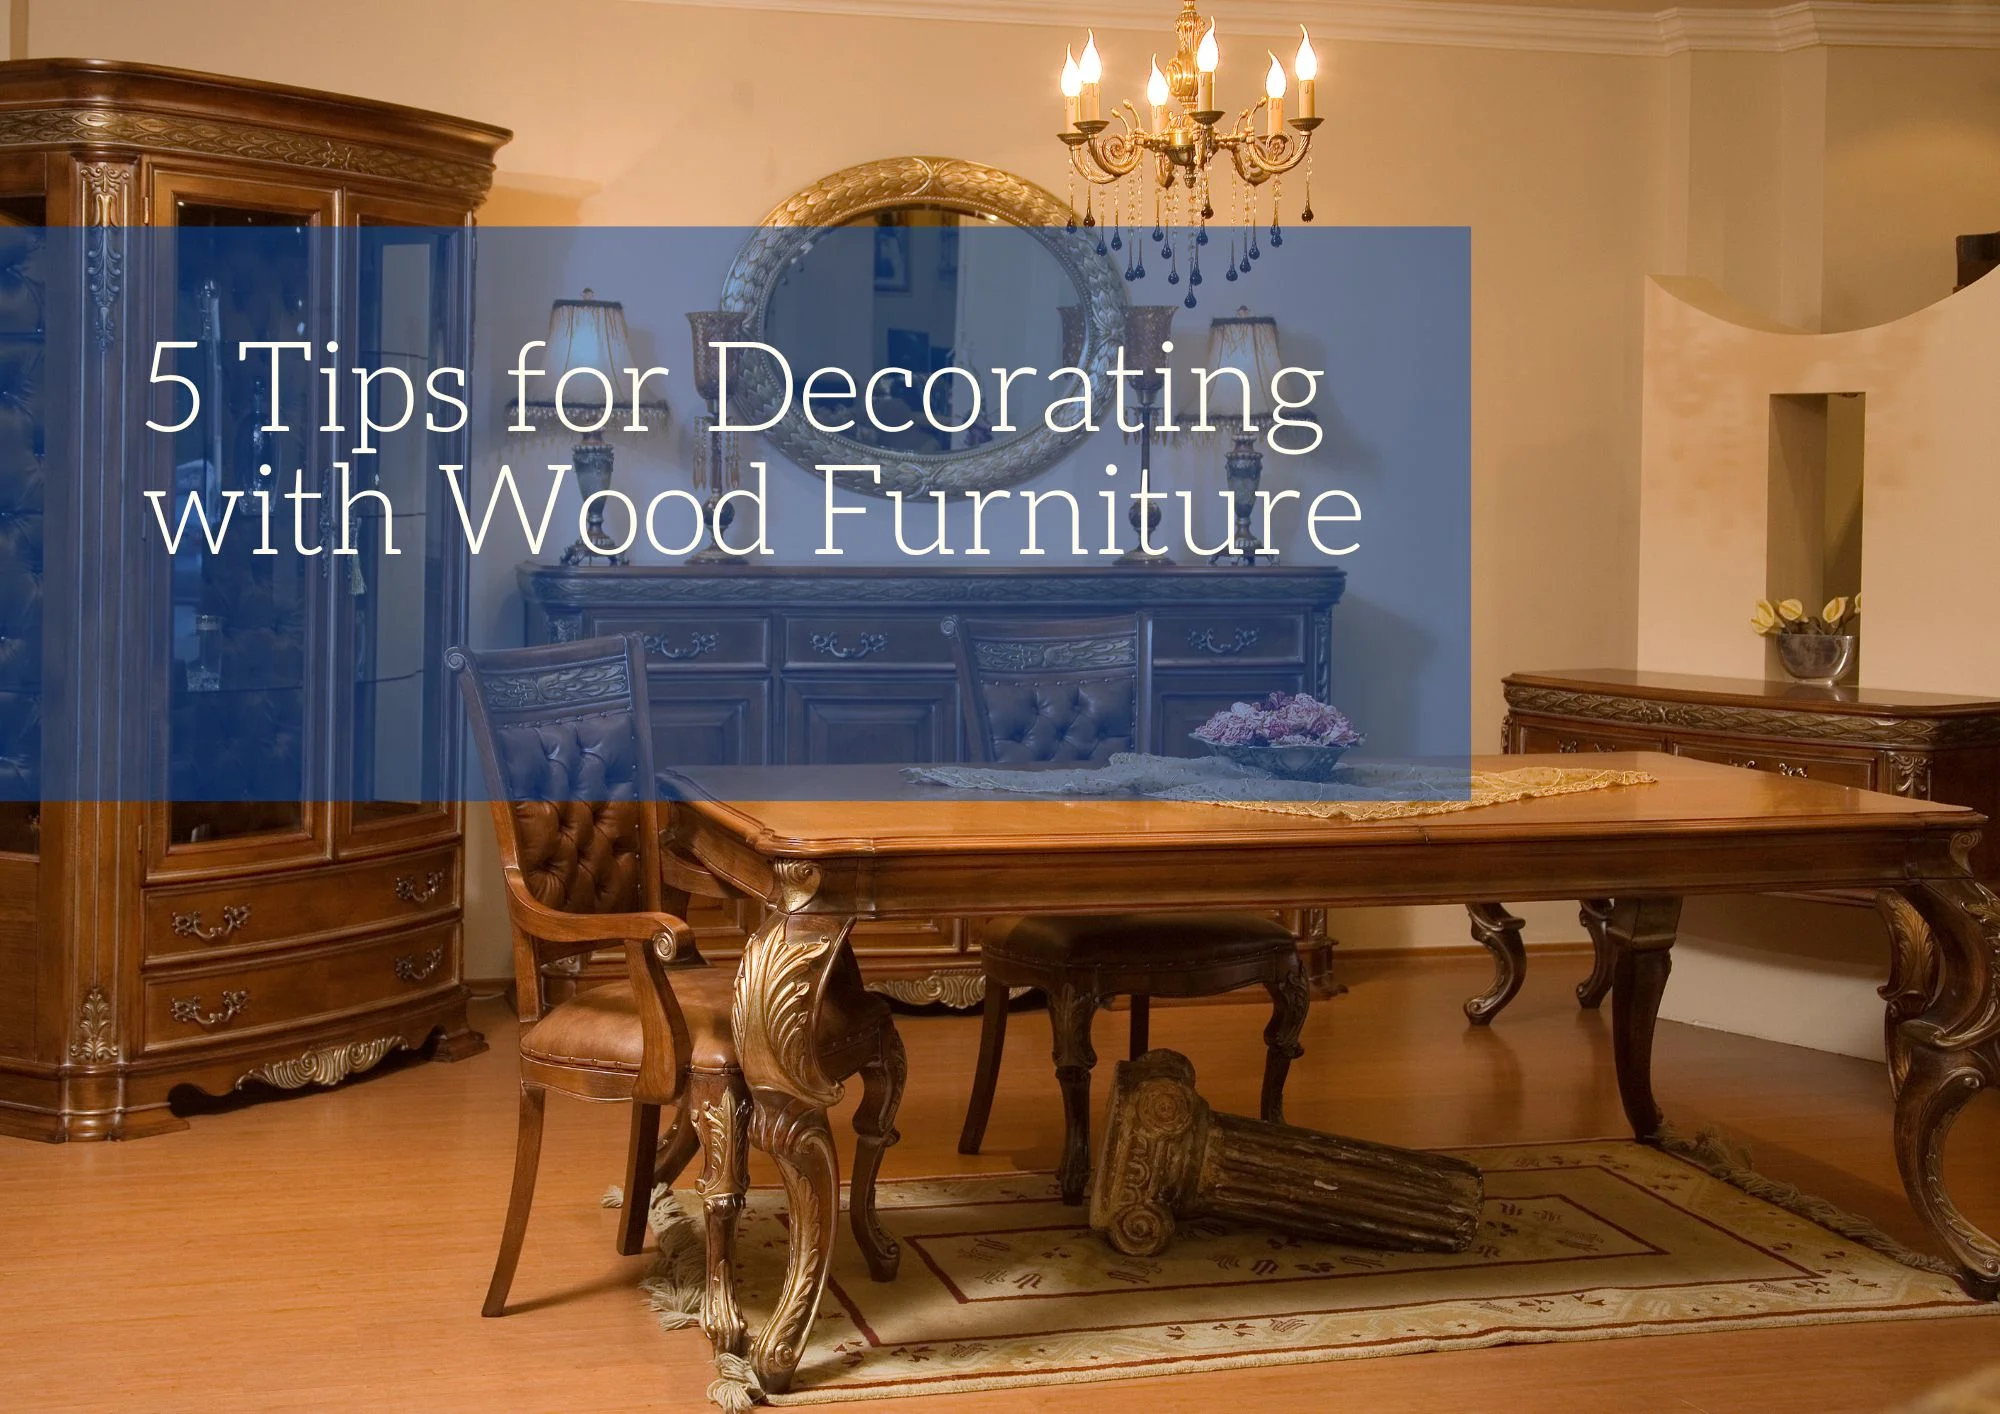 5 Tips for Decorating with Wood Furniture